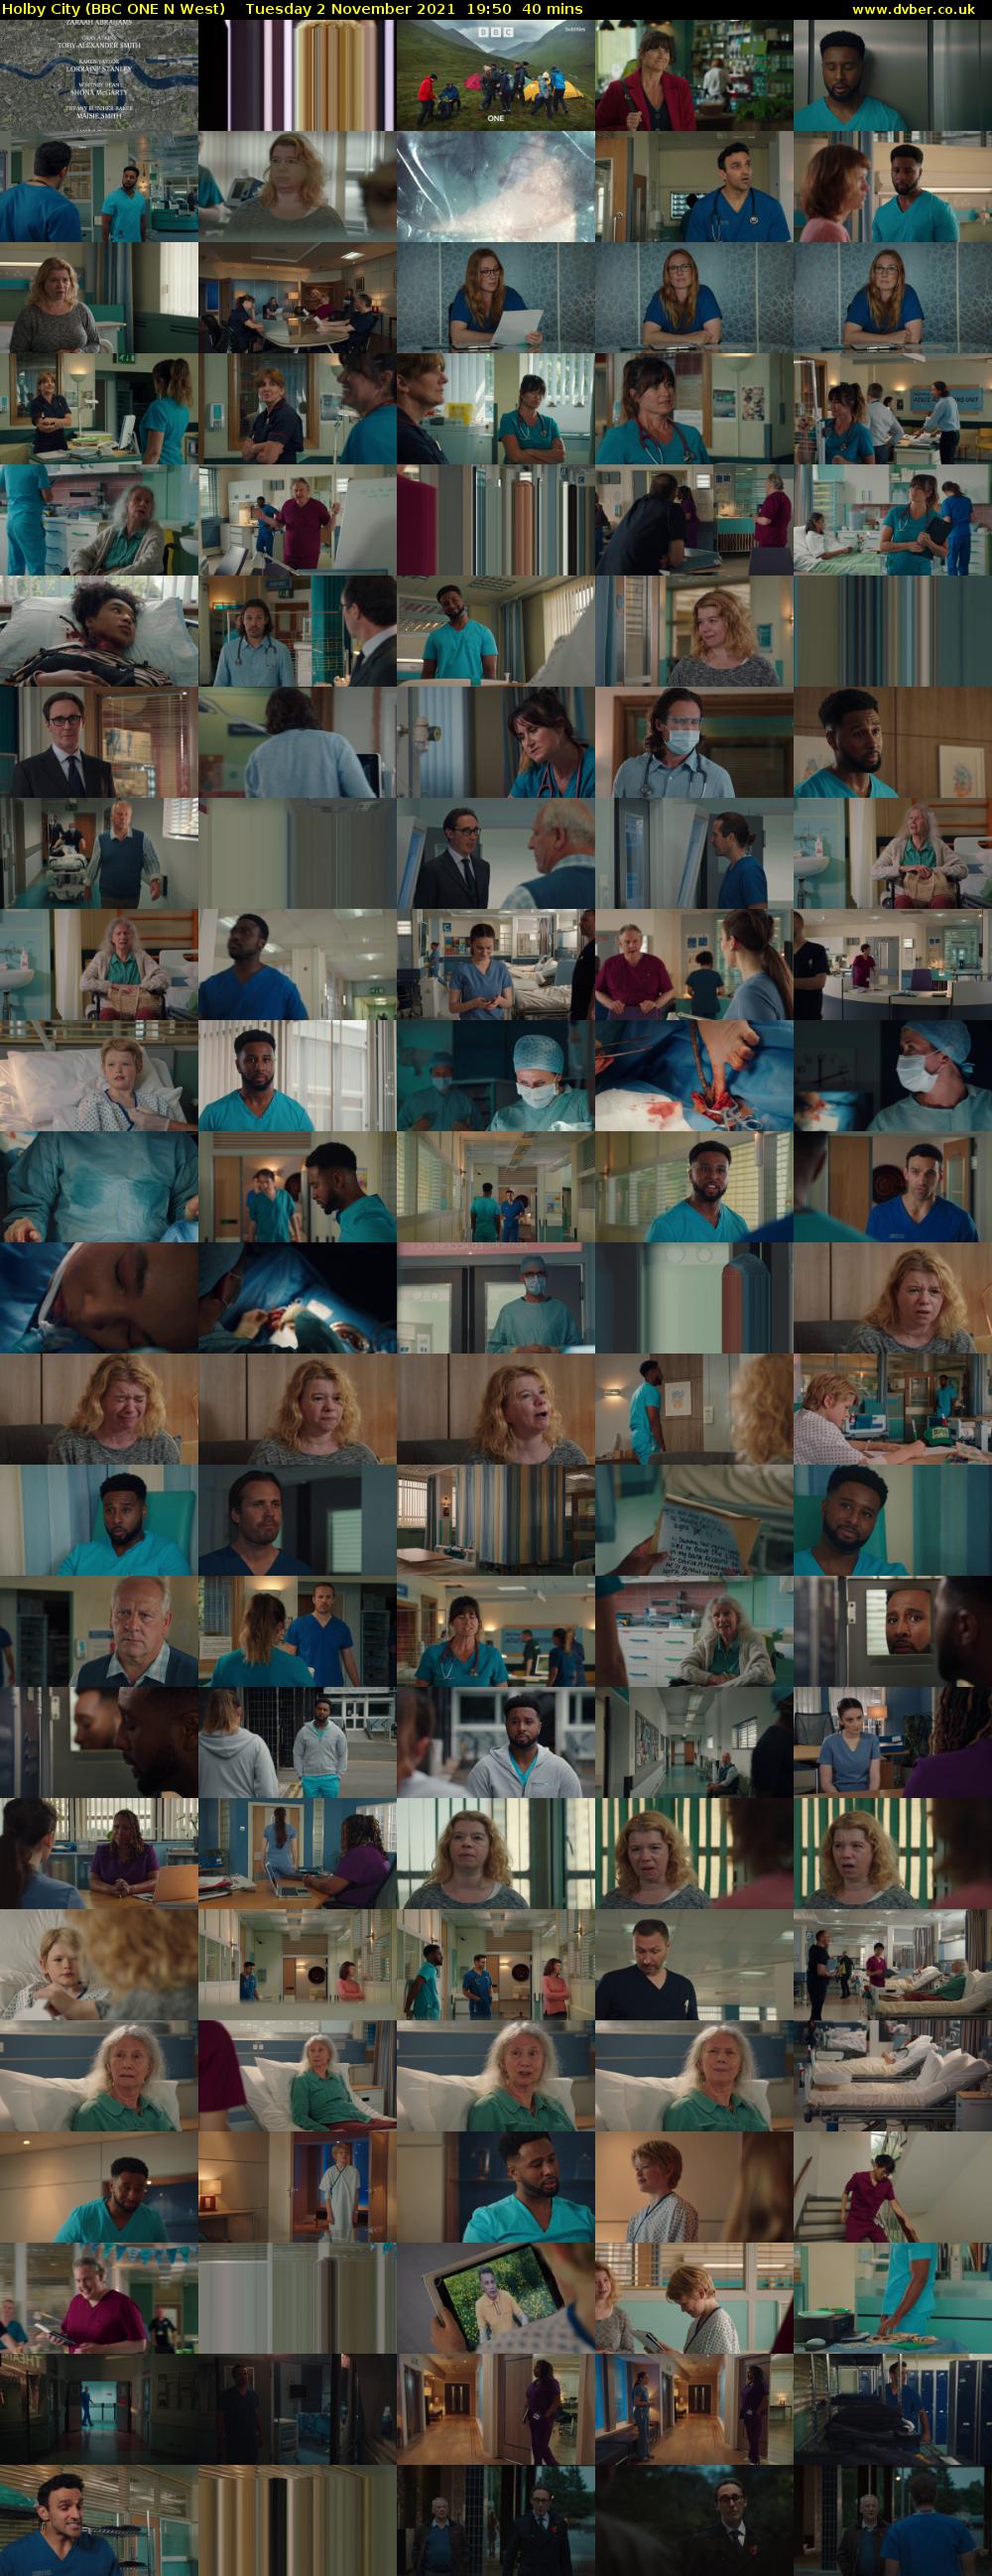 Holby City (BBC ONE N West) Tuesday 2 November 2021 19:50 - 20:30